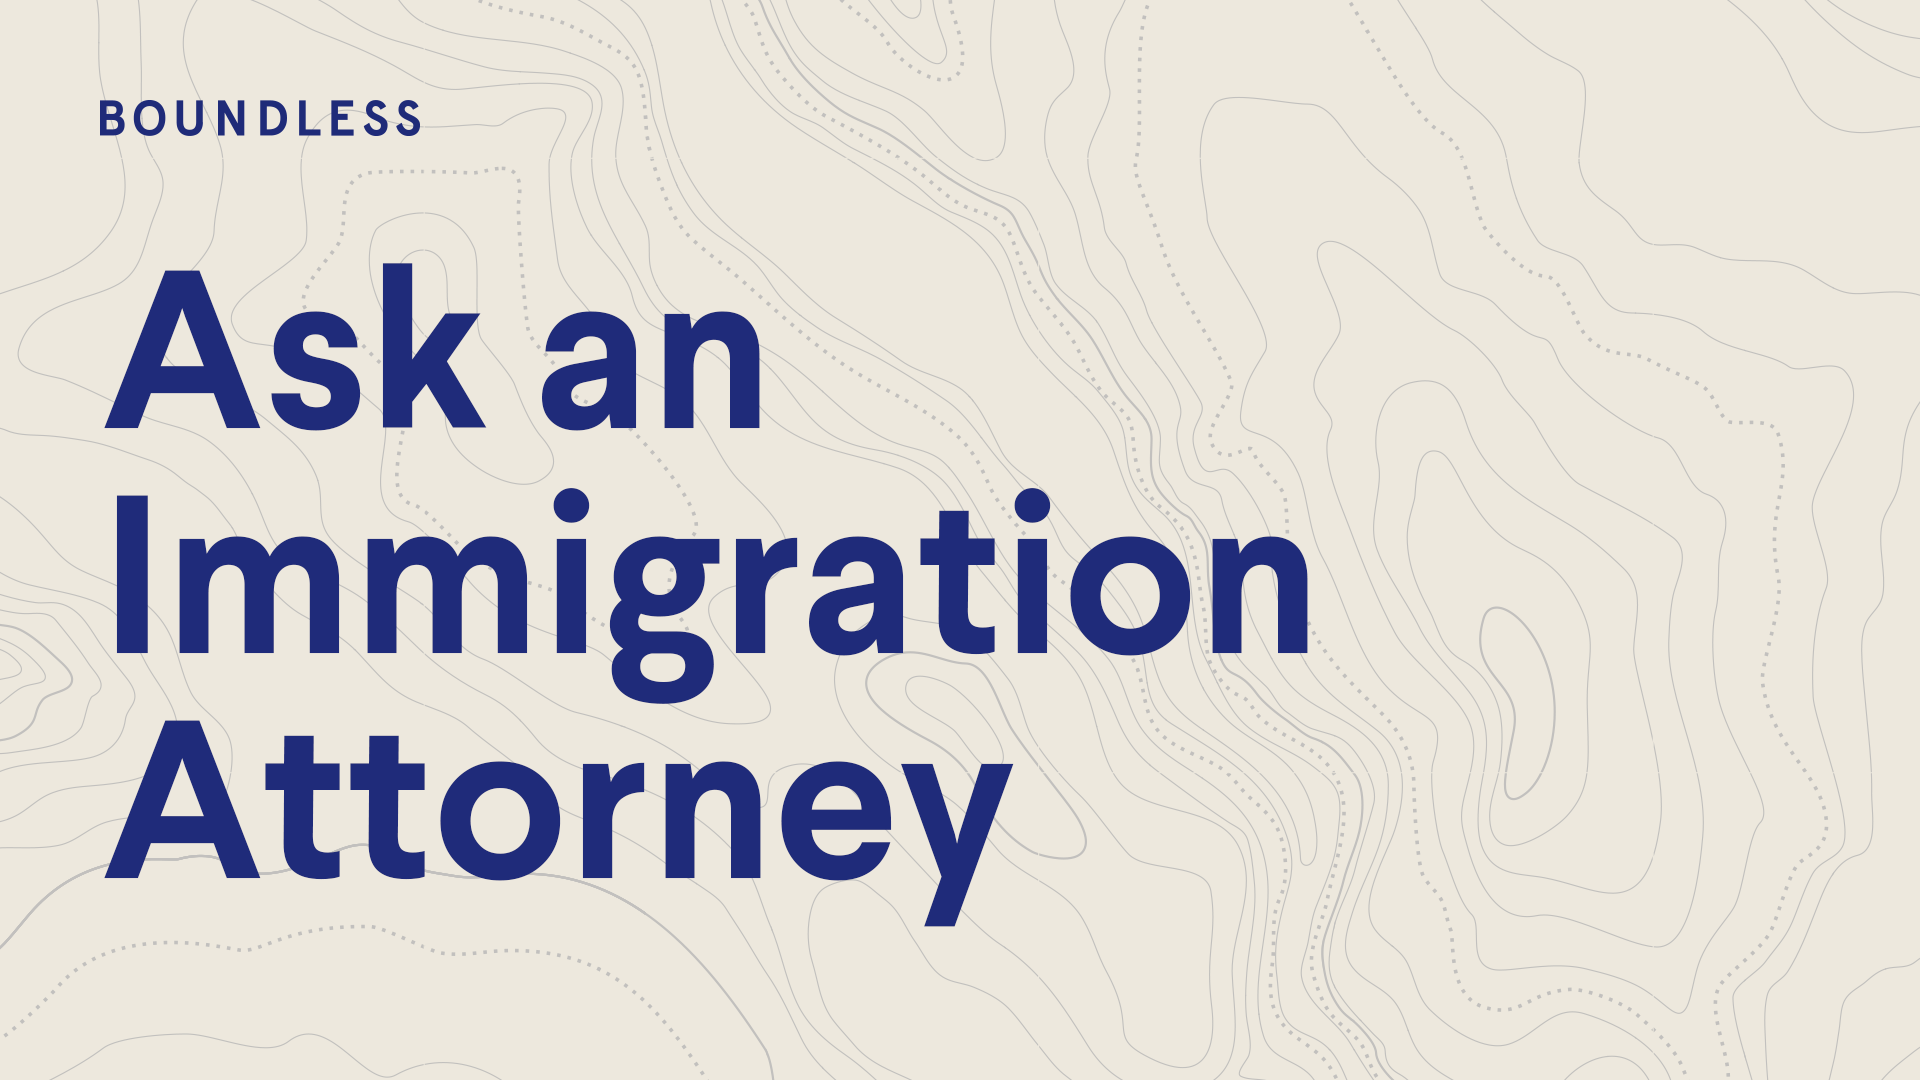 Boundless Ask an Immigration Attorney